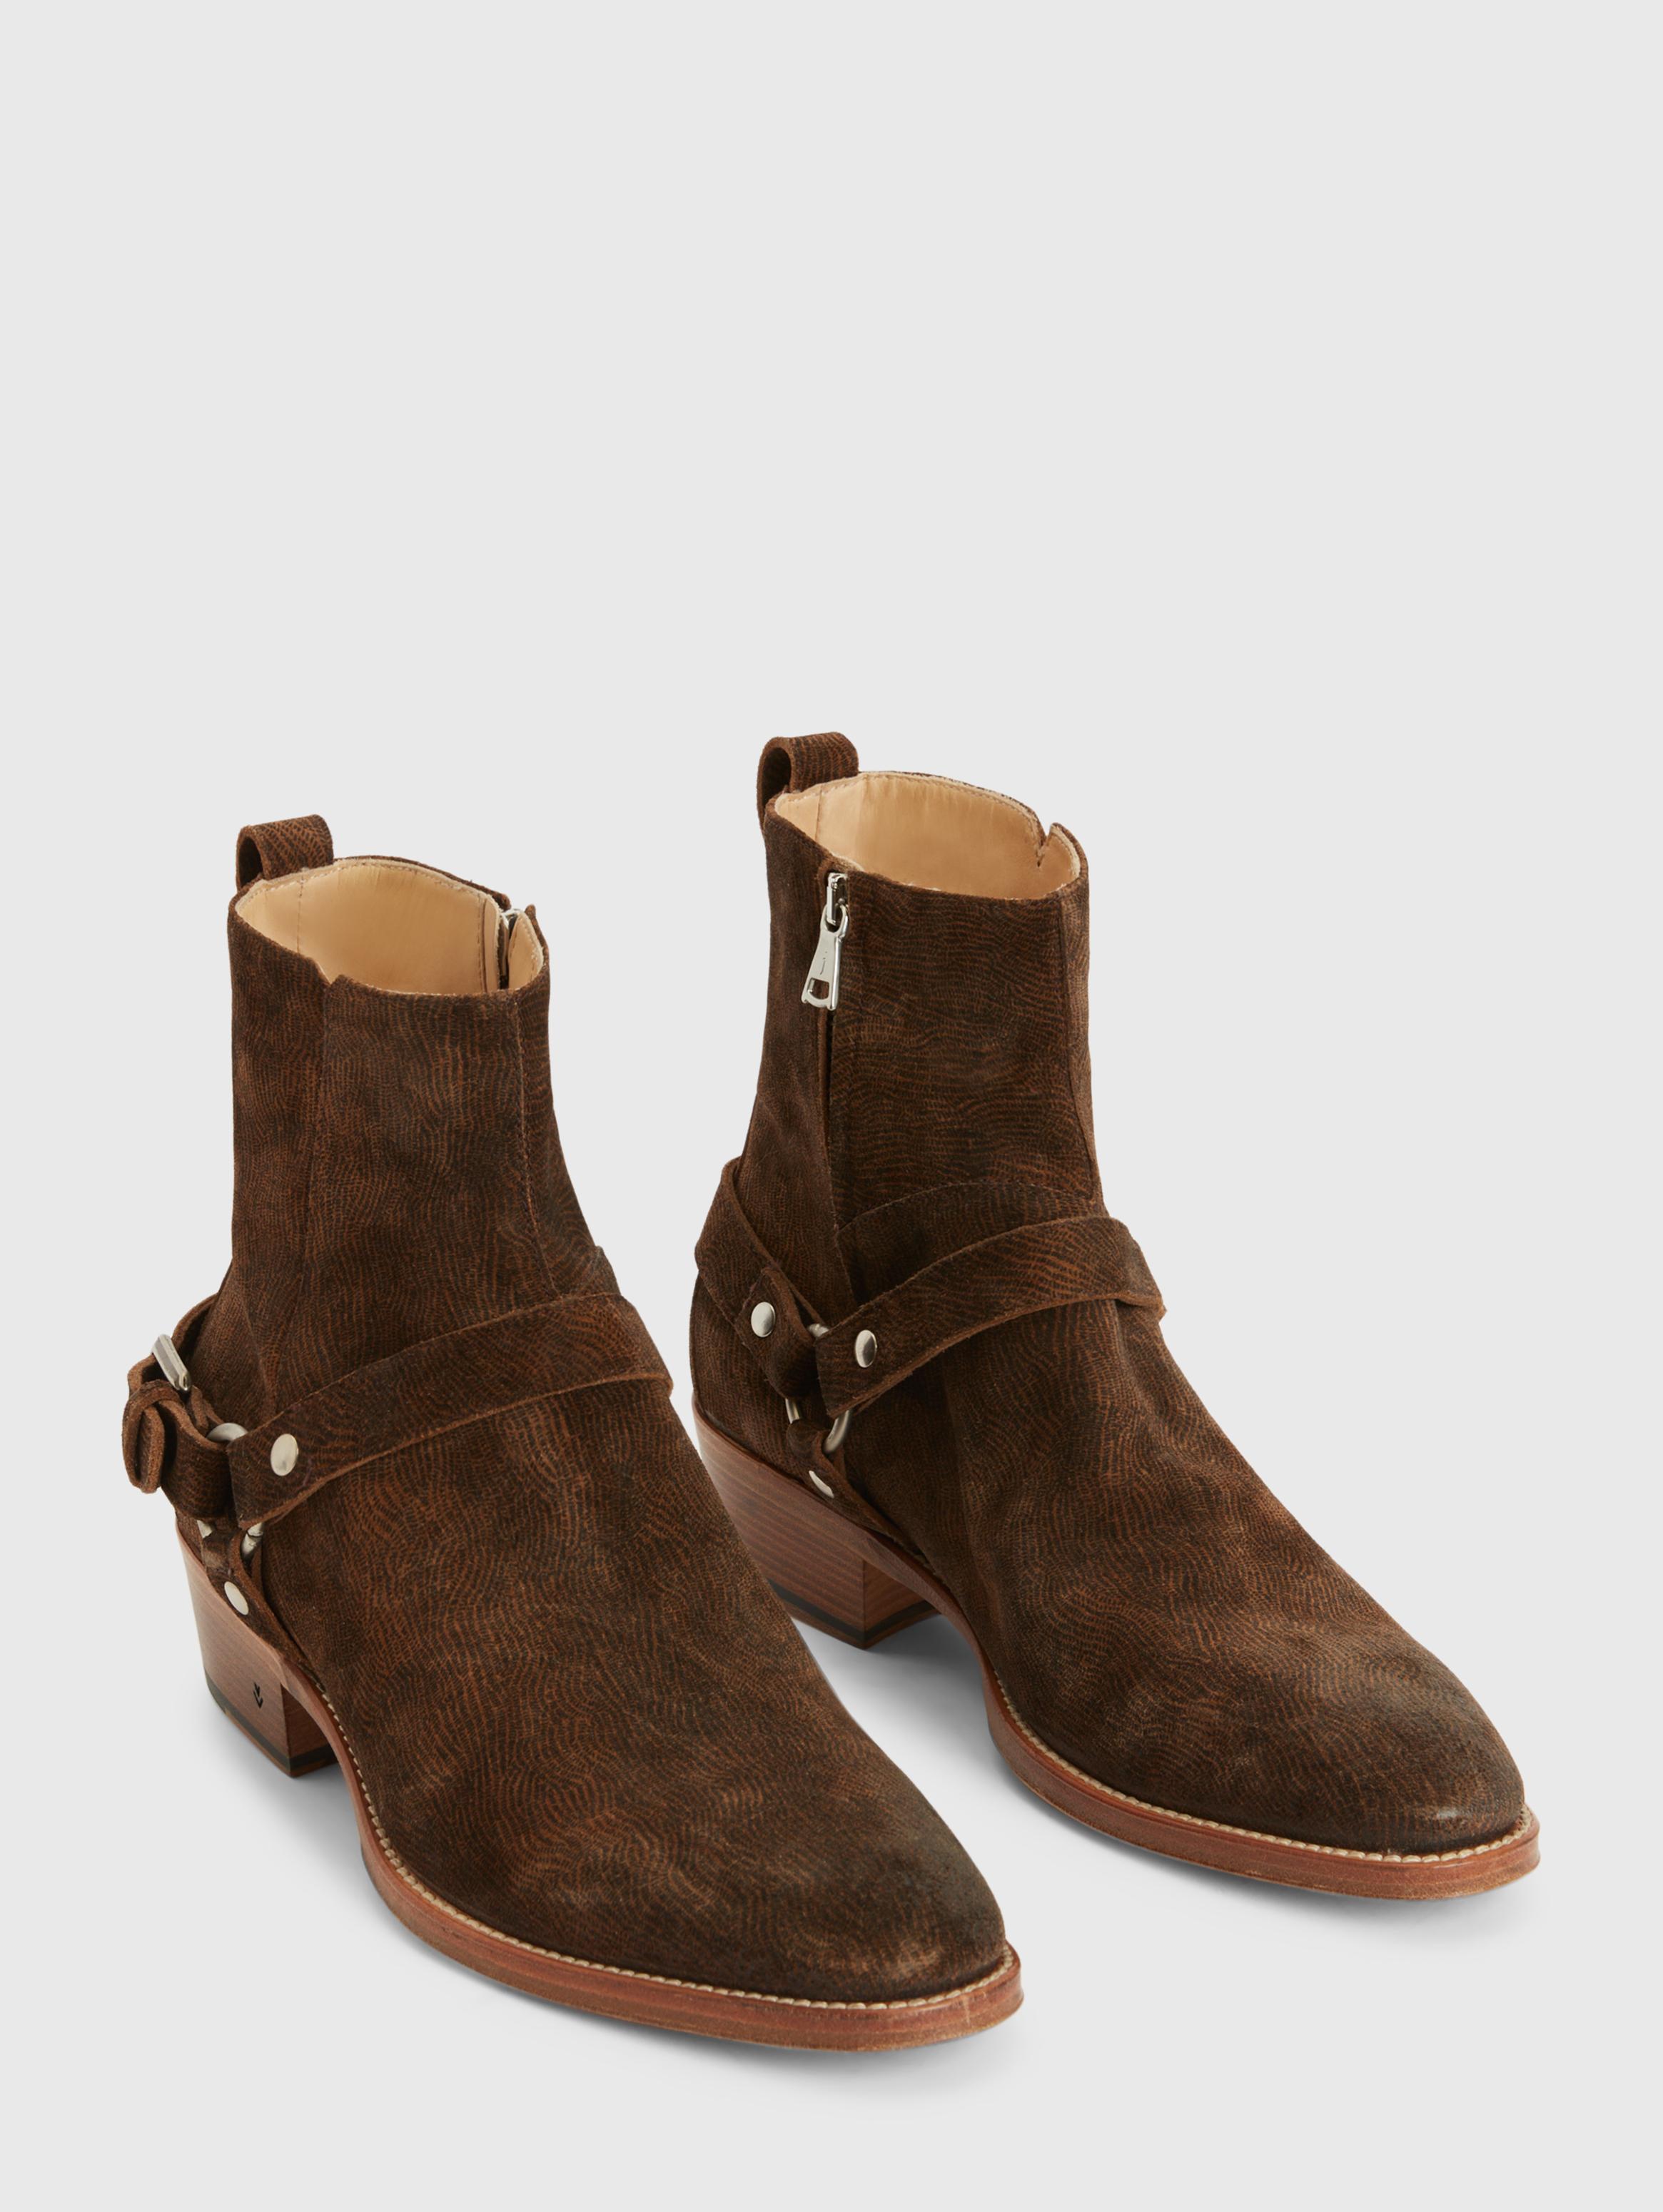 LUDLOW HARNESS BOOT